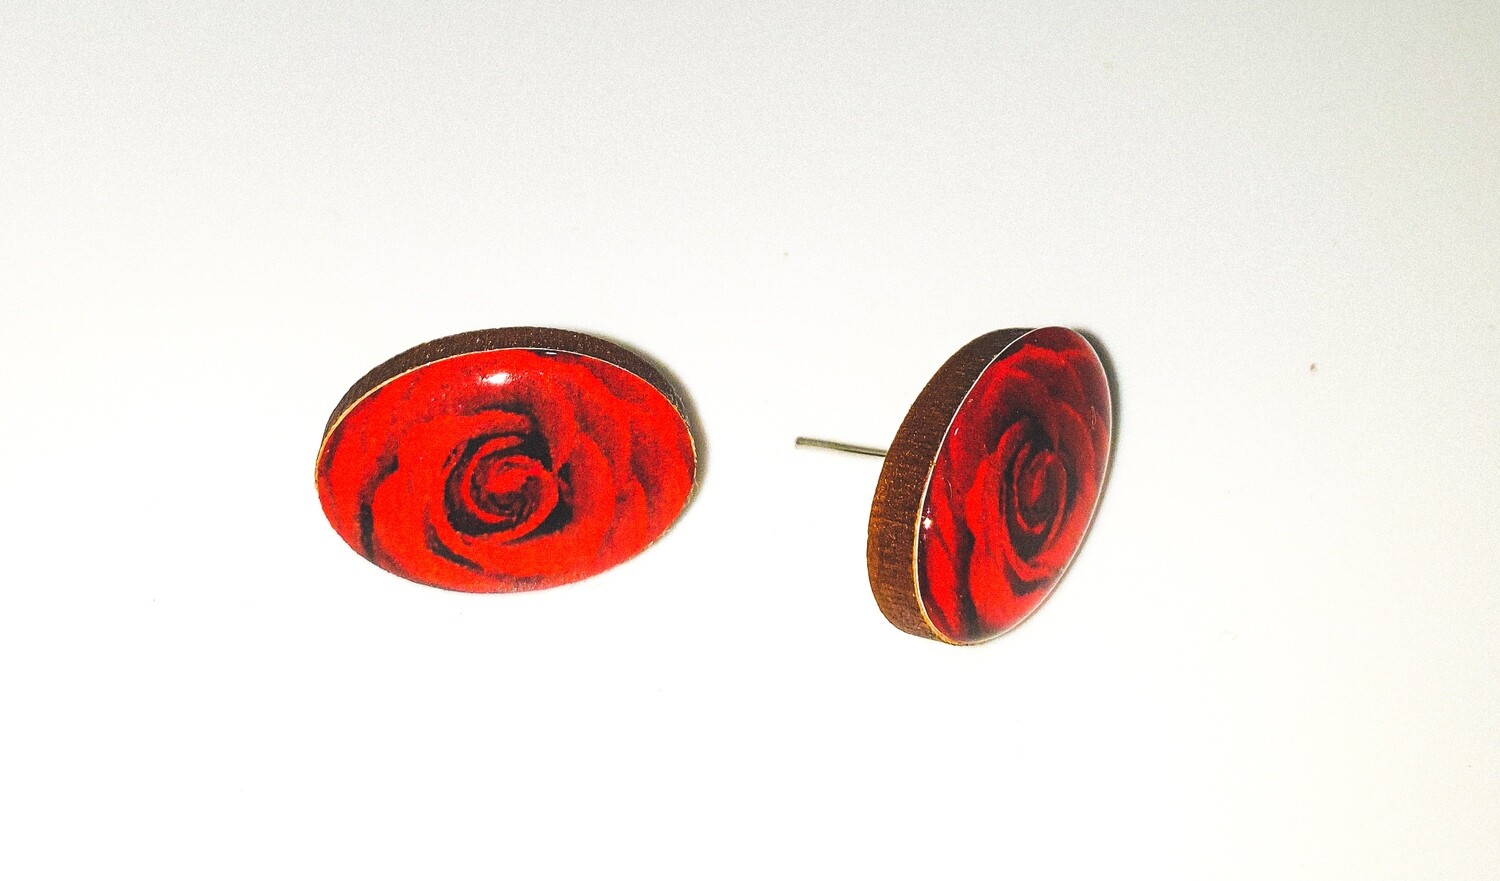 Dome stud earrings: Red rose